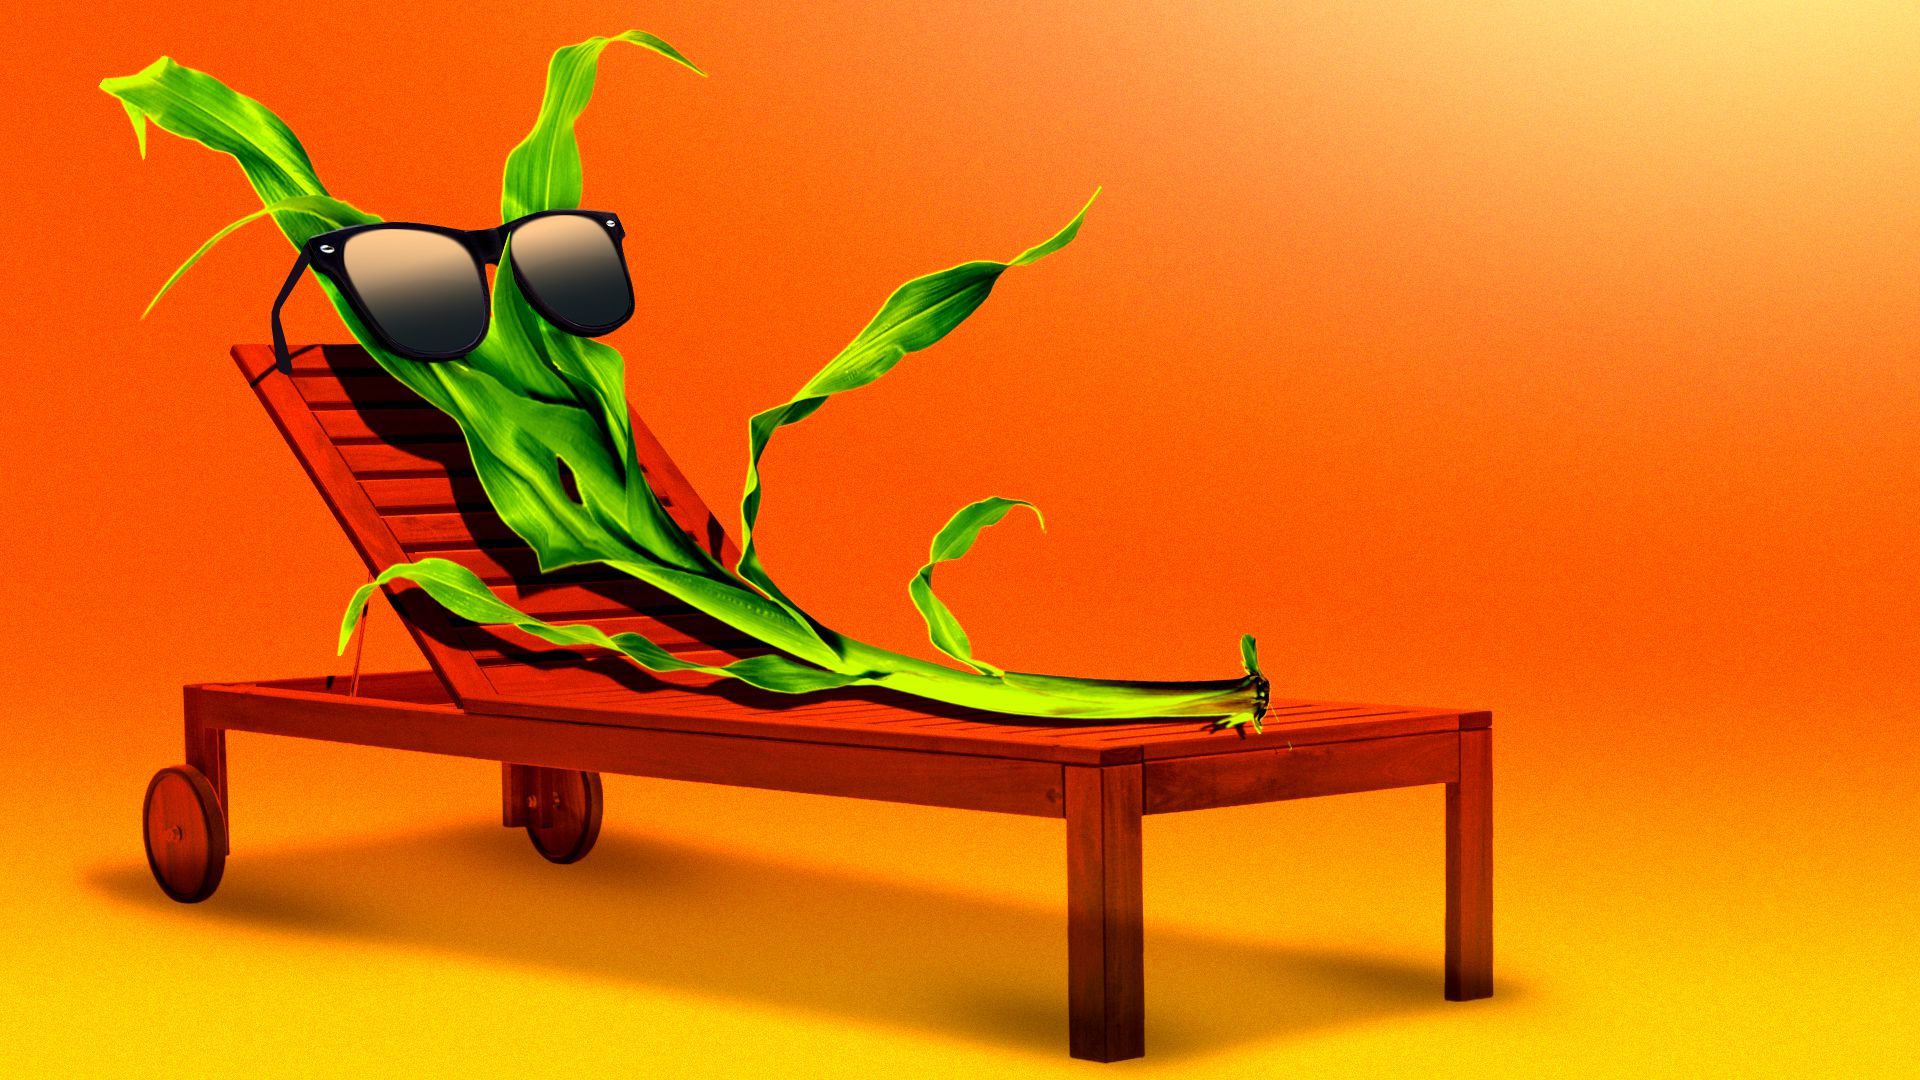 Illustration of a maize plant wearing sunglasses and reclining on a lounge chair under a bright sun